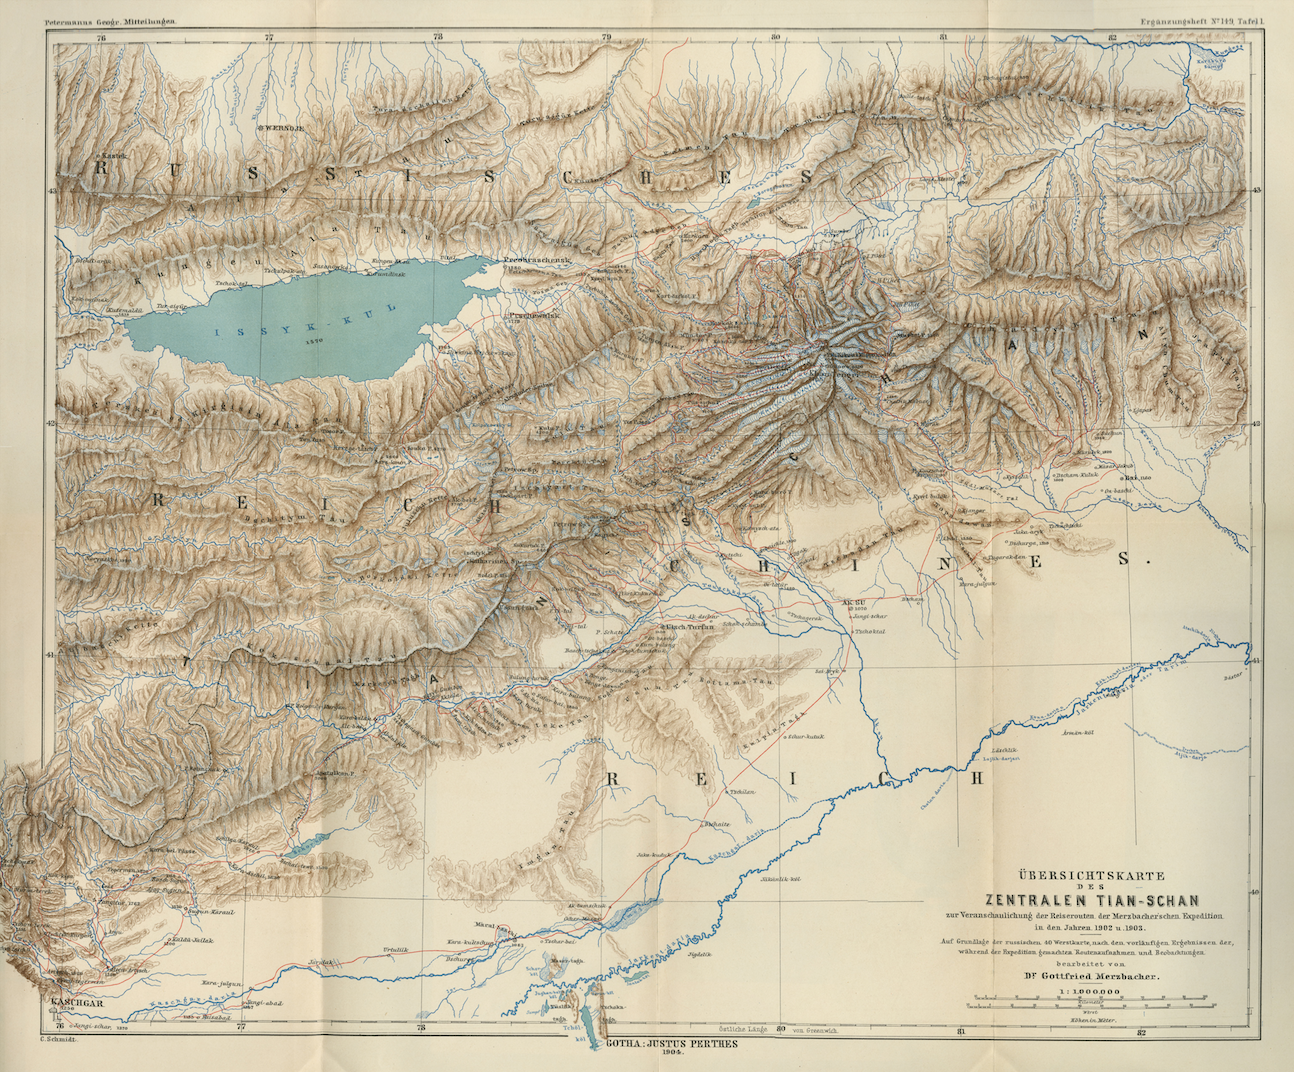 Map of Central Tian-Shan 1904